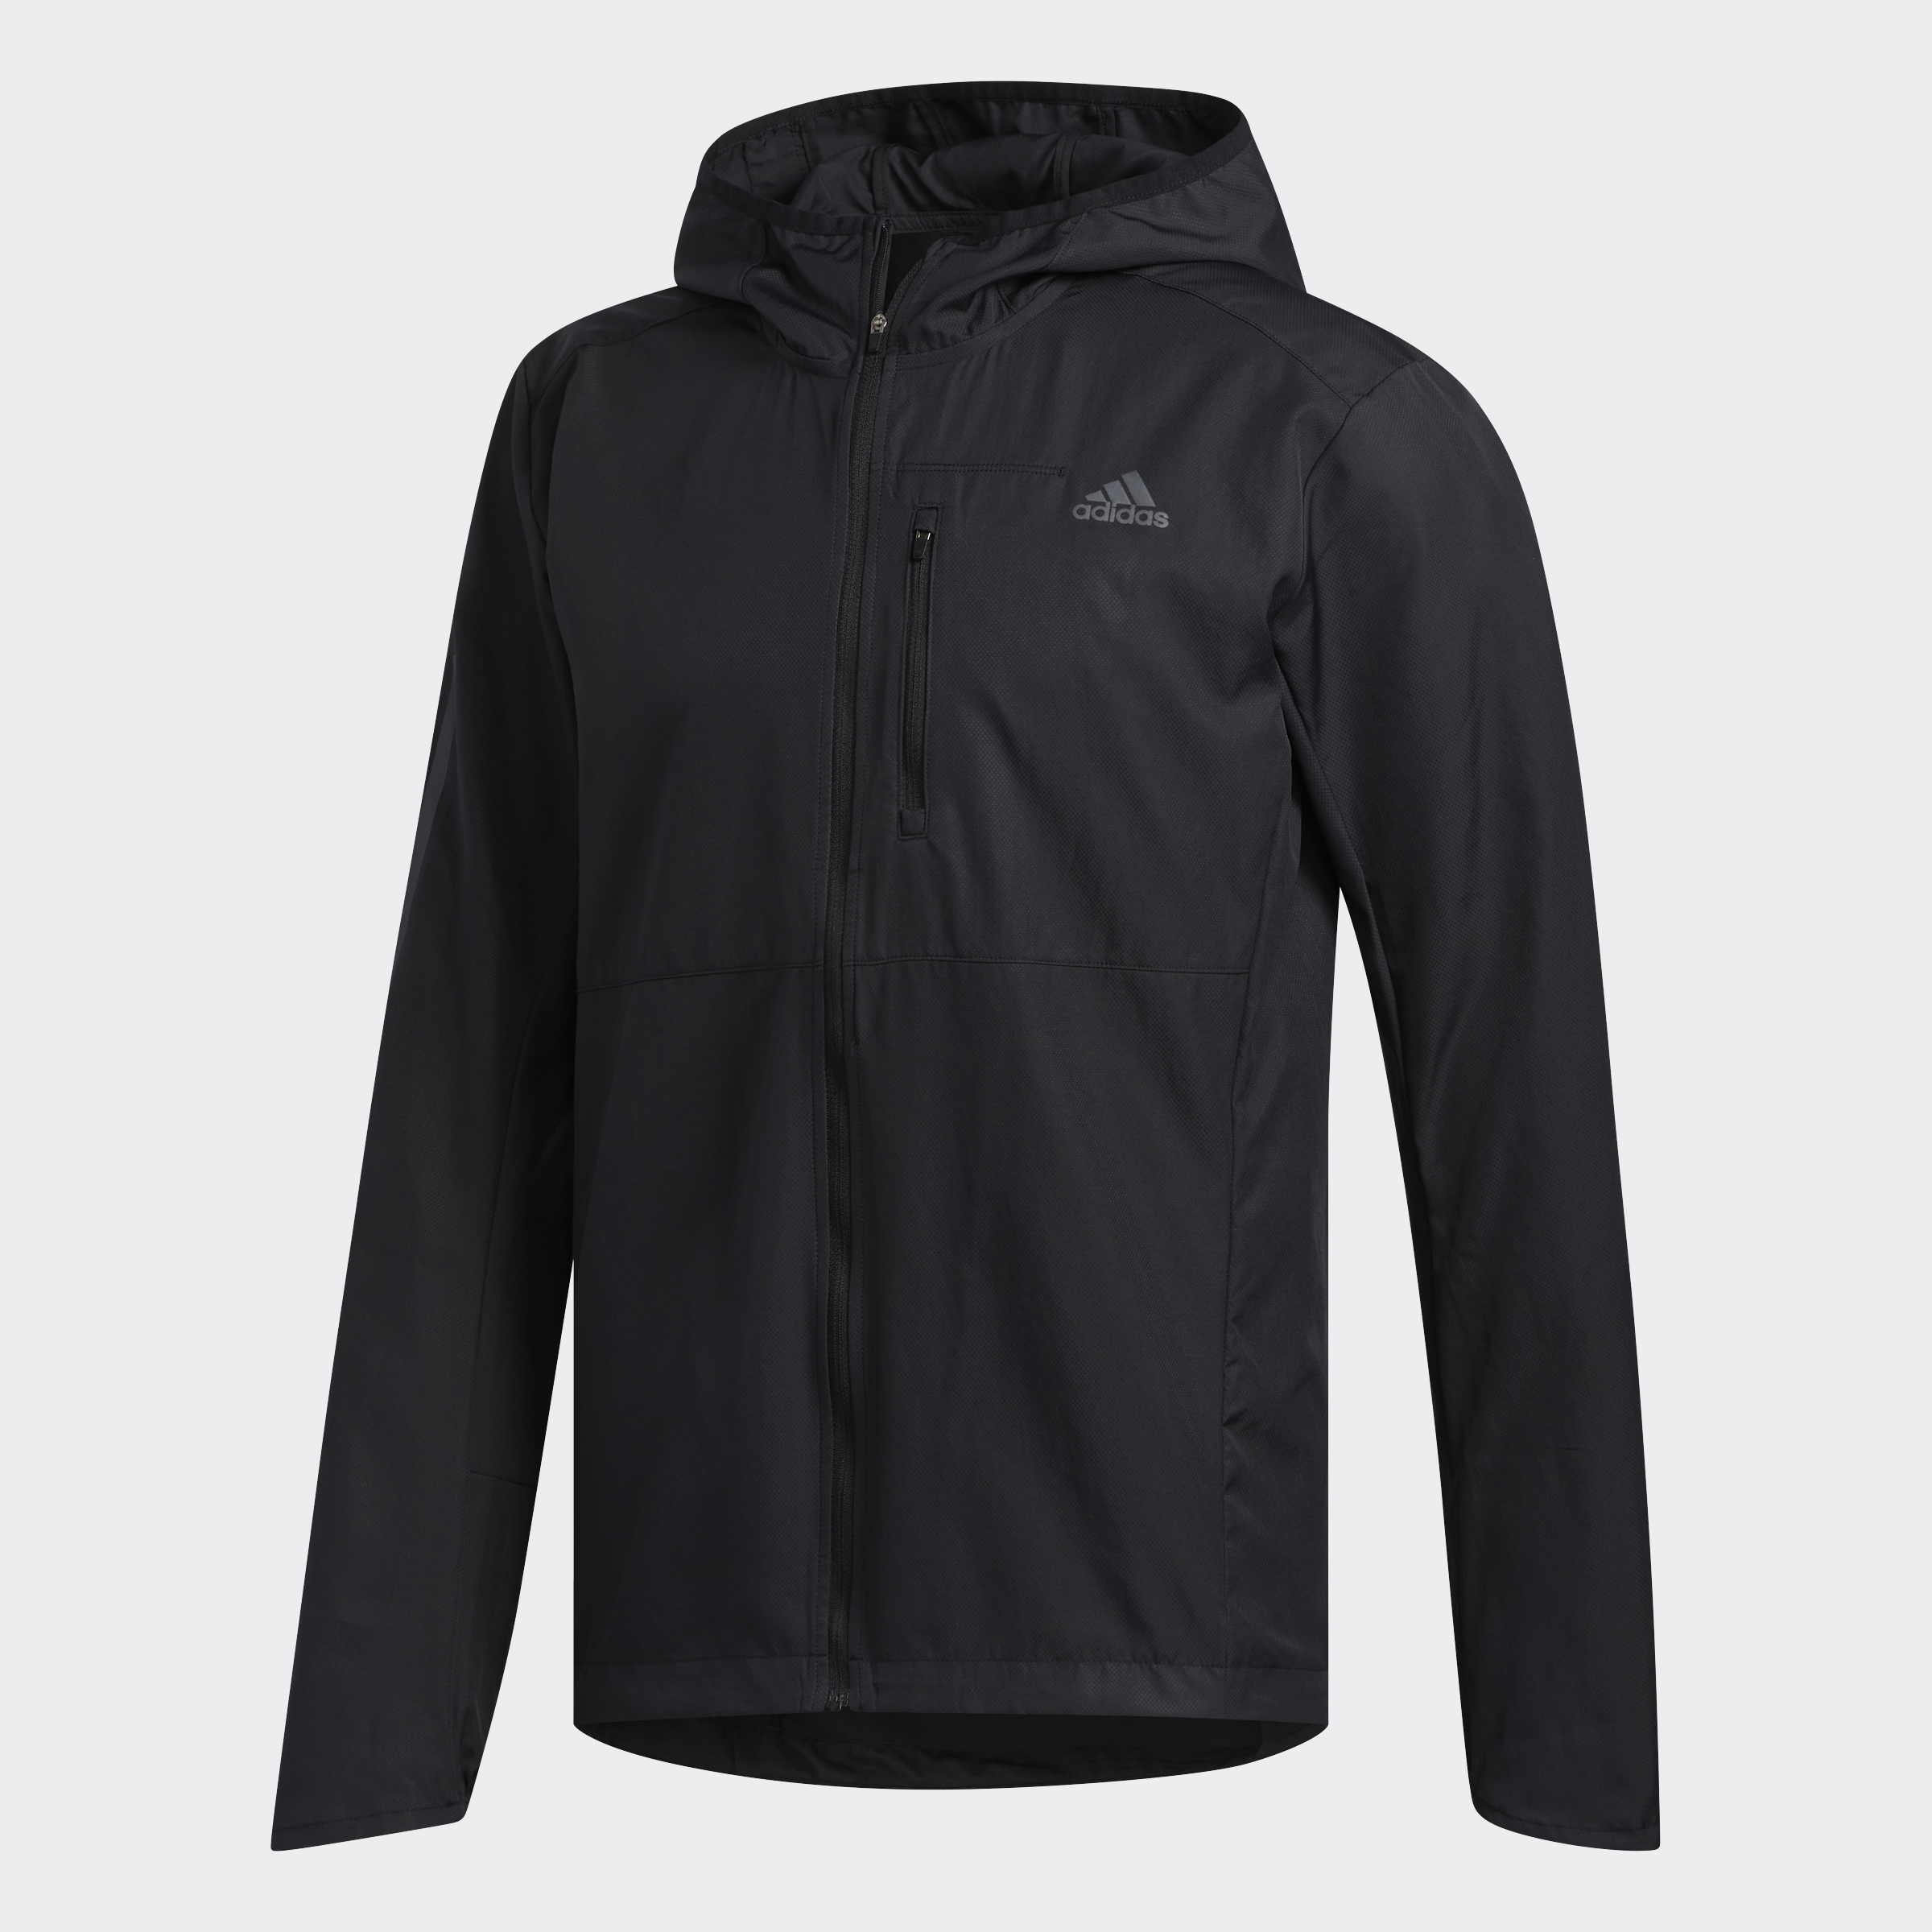 Image 2 - adidas Own the Run Hooded Wind Jacket Men's